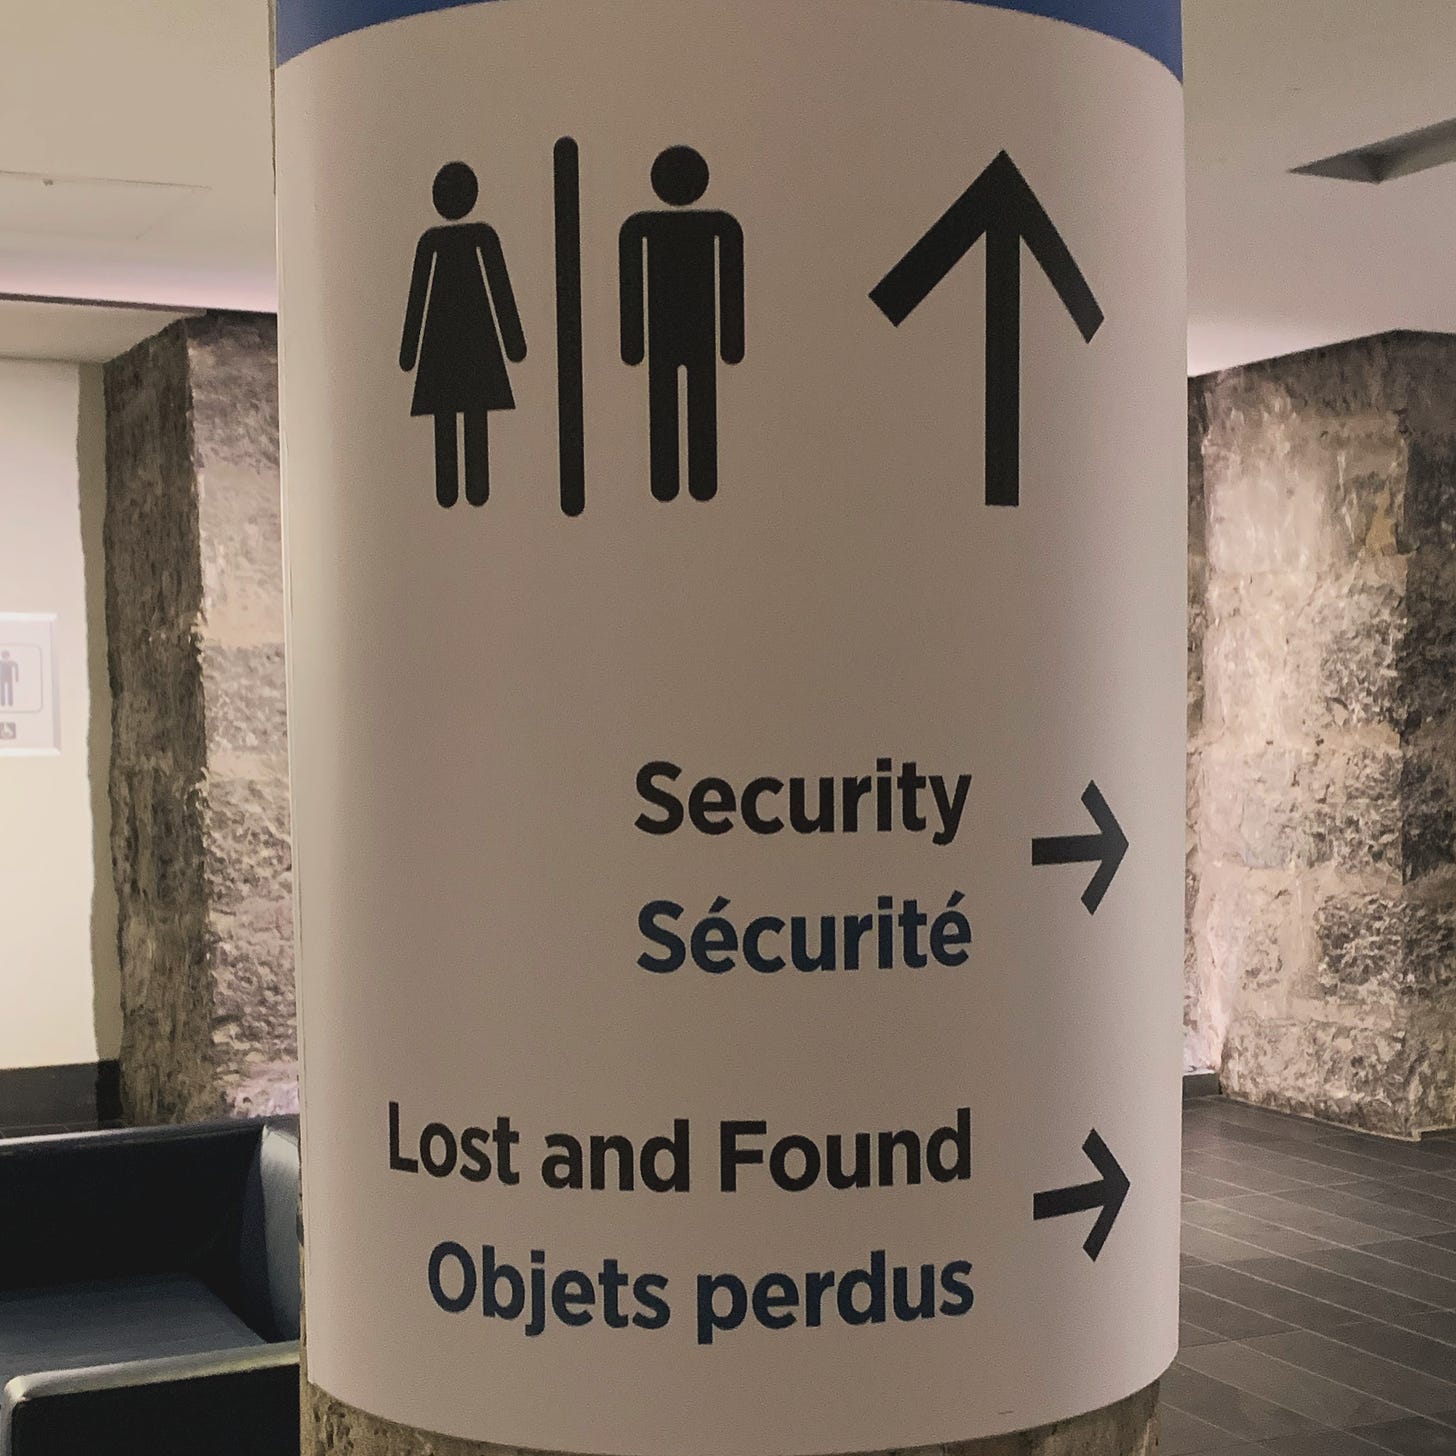 A direction sign on a pillar, in French and English, with directions to the bathroom, scurity, and Lost and found